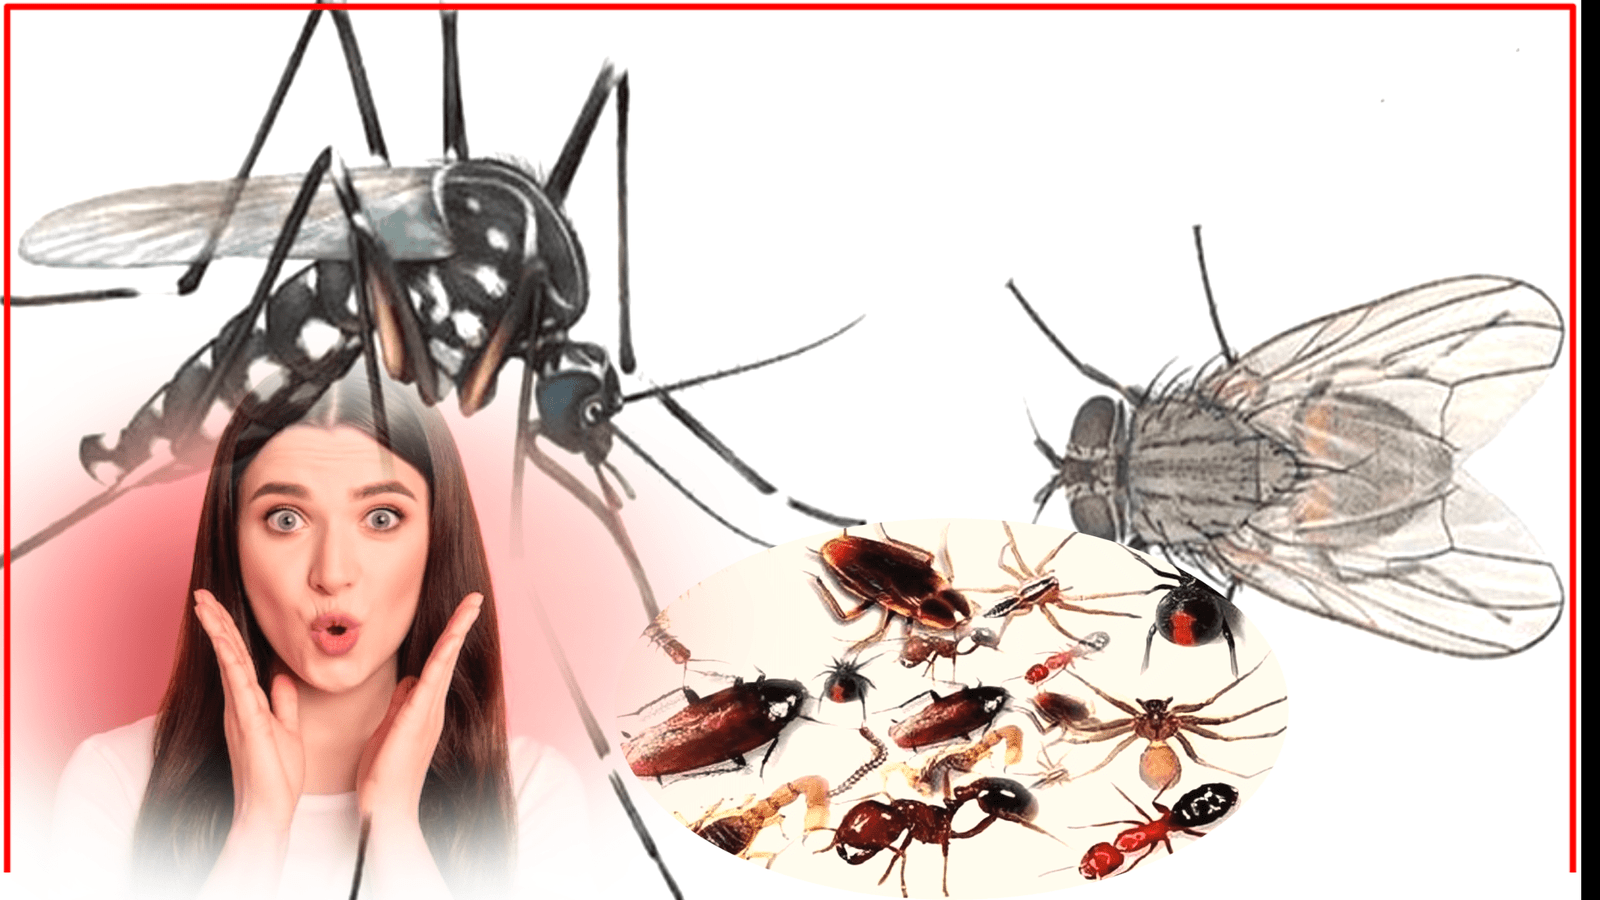 Lifestyle: Easy and simple ways to get rid of mosquitoes, flies, insects